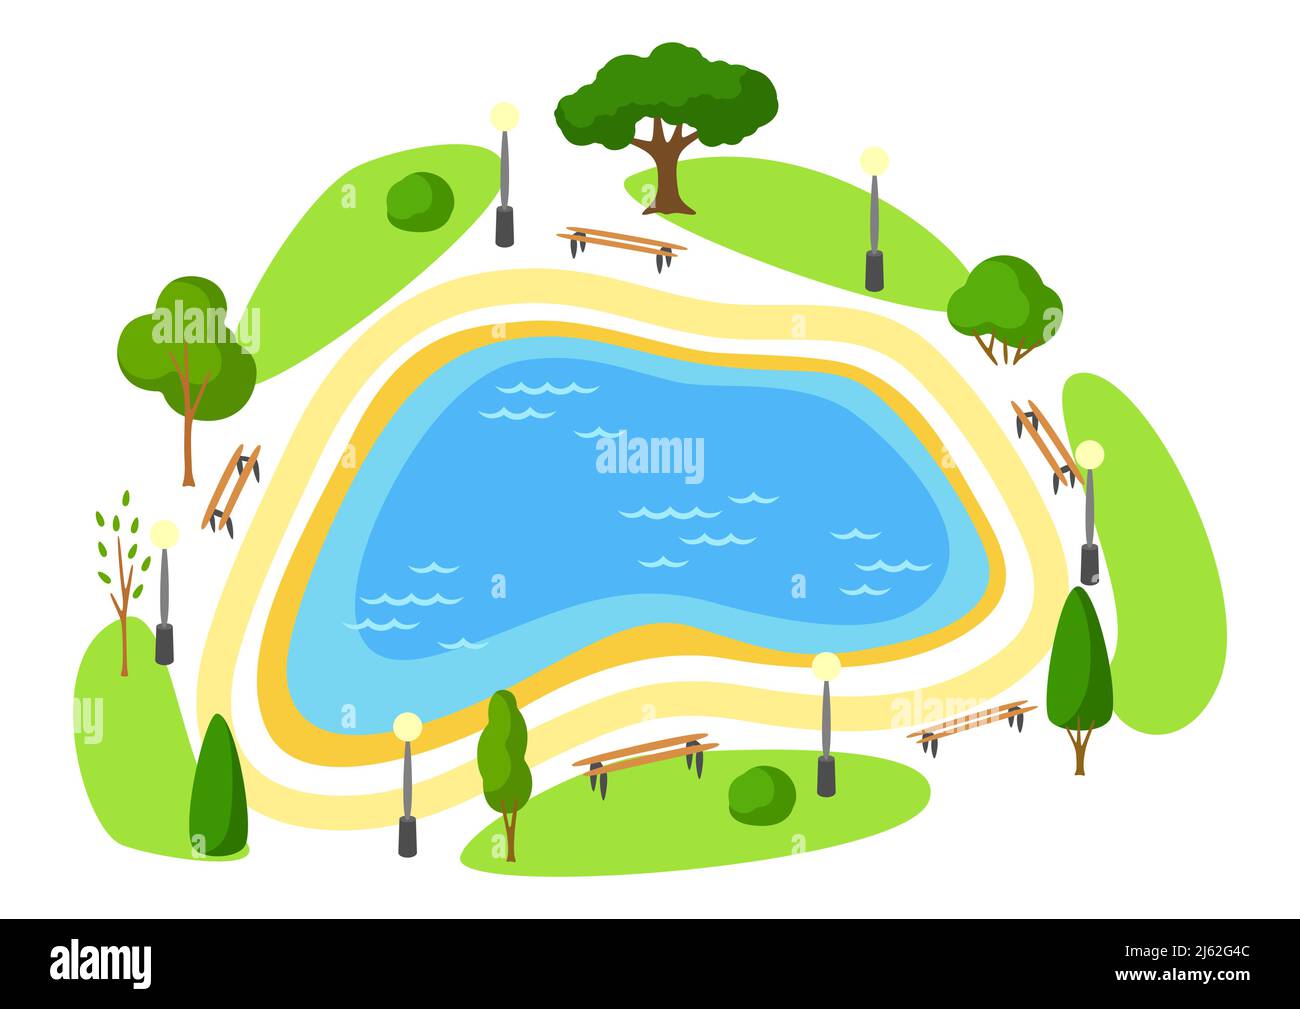 Illustration of beautiful summer or spring city park. Urban public space with lake, lawn and trees for walking and relaxing. Stock Vector